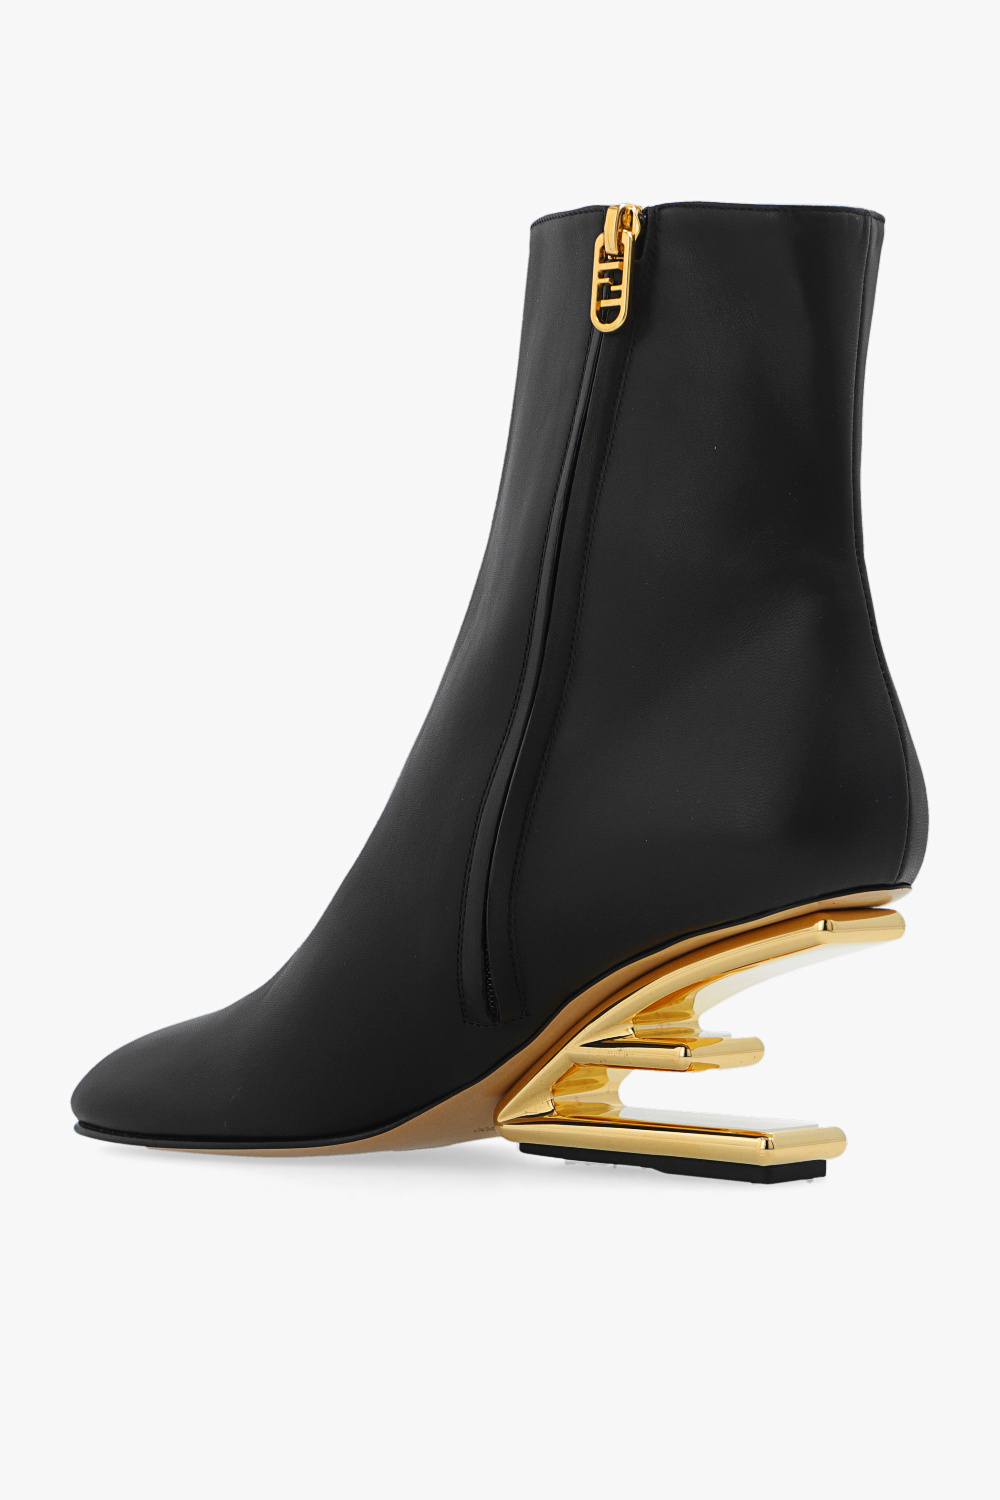 Fendi ‘Faster’ heeled ankle boots